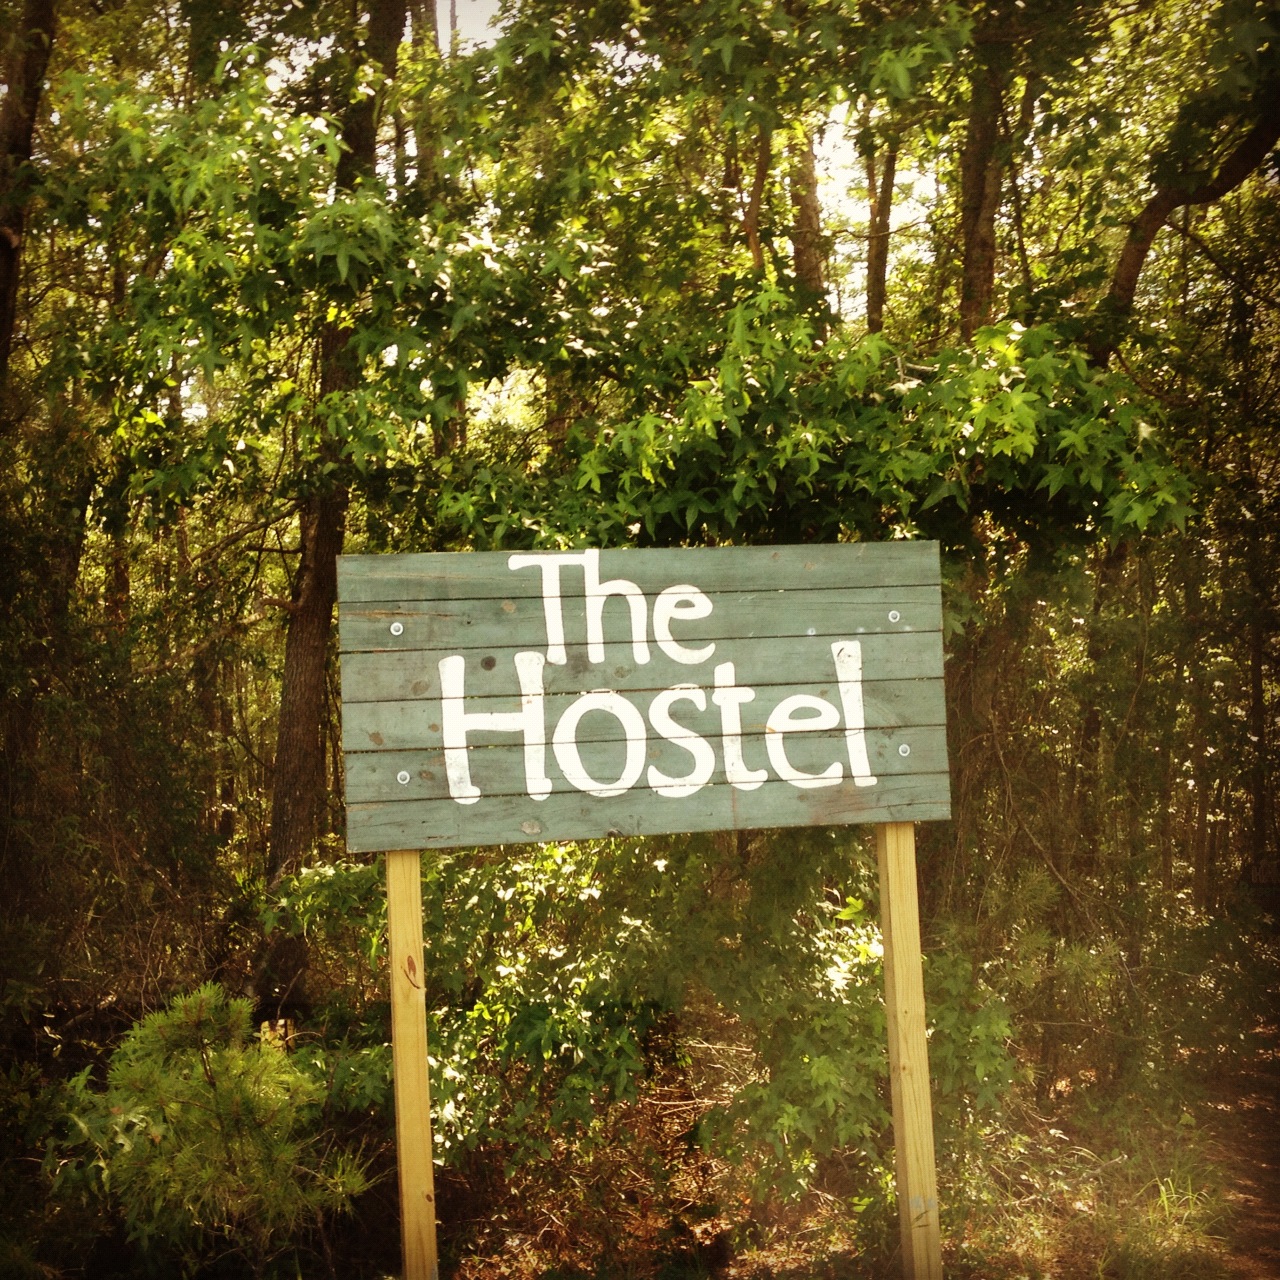 10 Things that I loved and learned at The Hostel in the Forest: